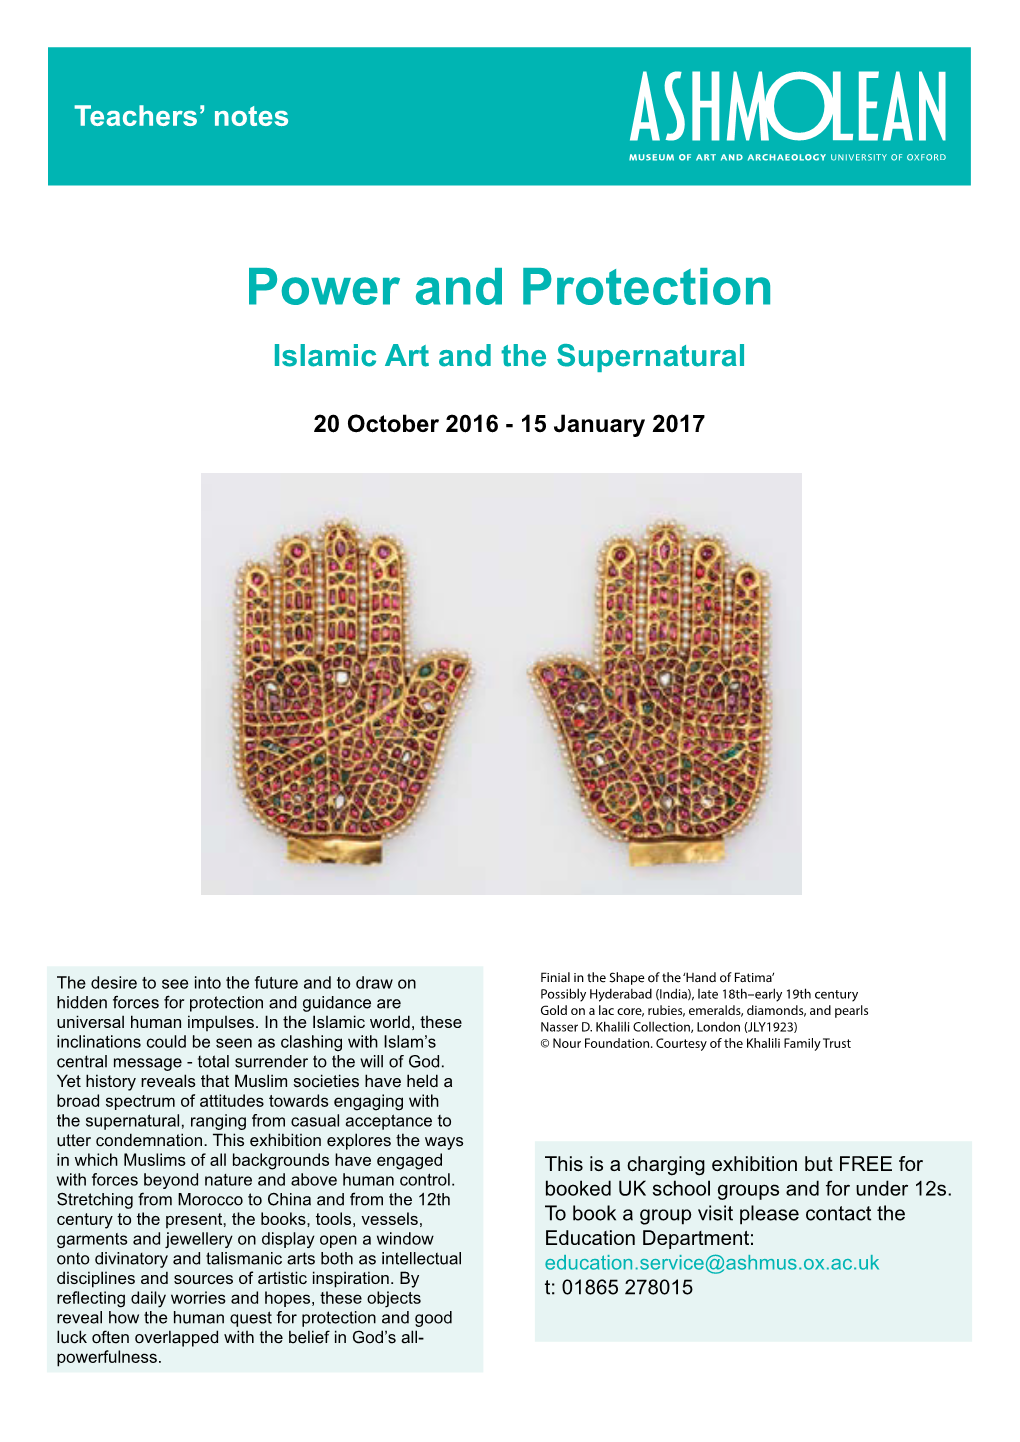 Power and Protection Islamic Art and the Supernatural